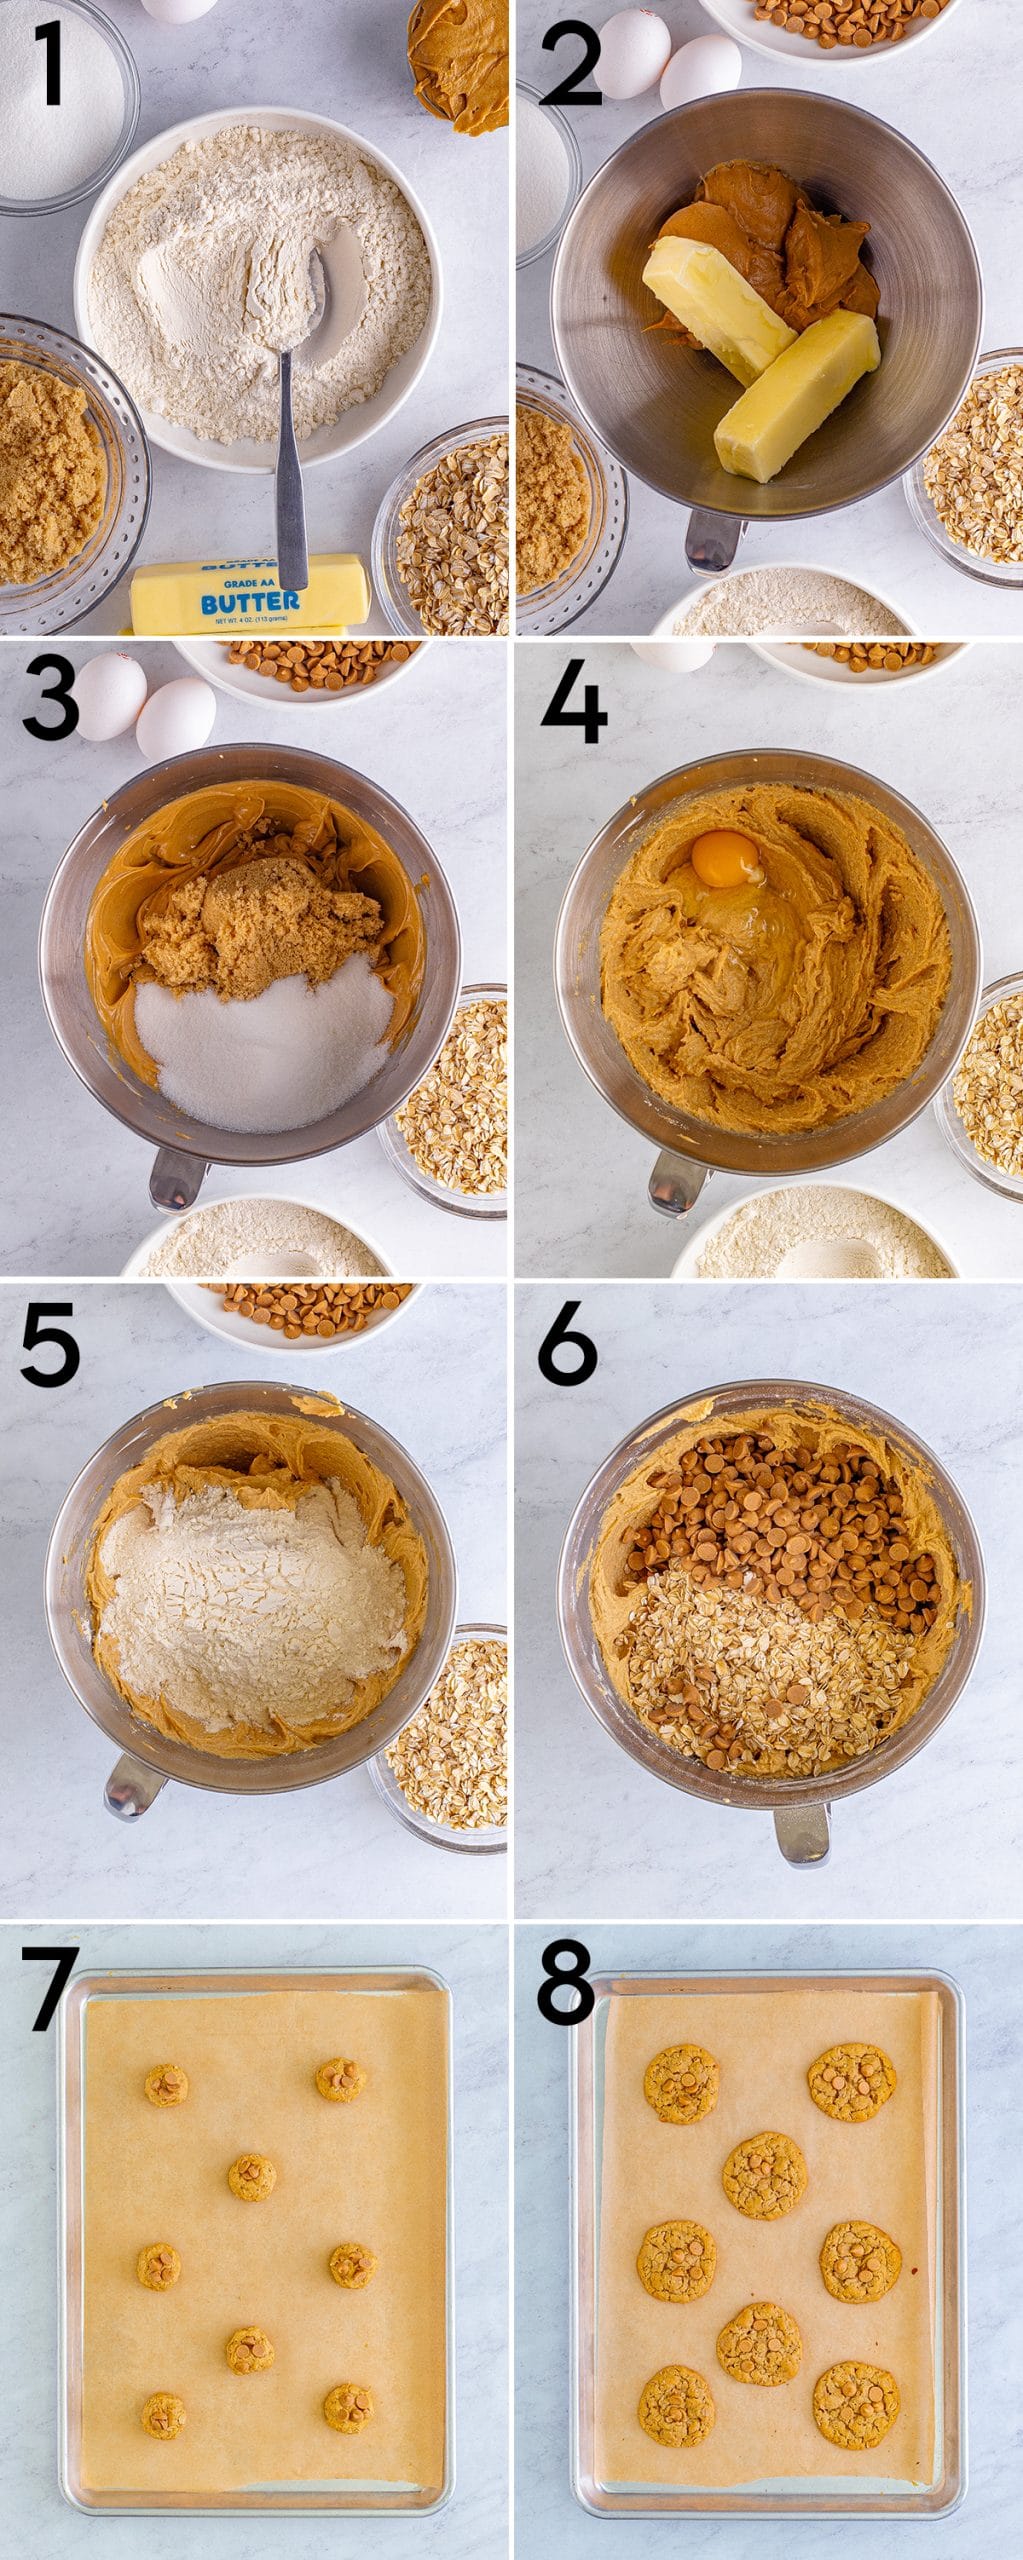 A collage of 8 step by step images showing how to make peanut butter oatmeal cookies.